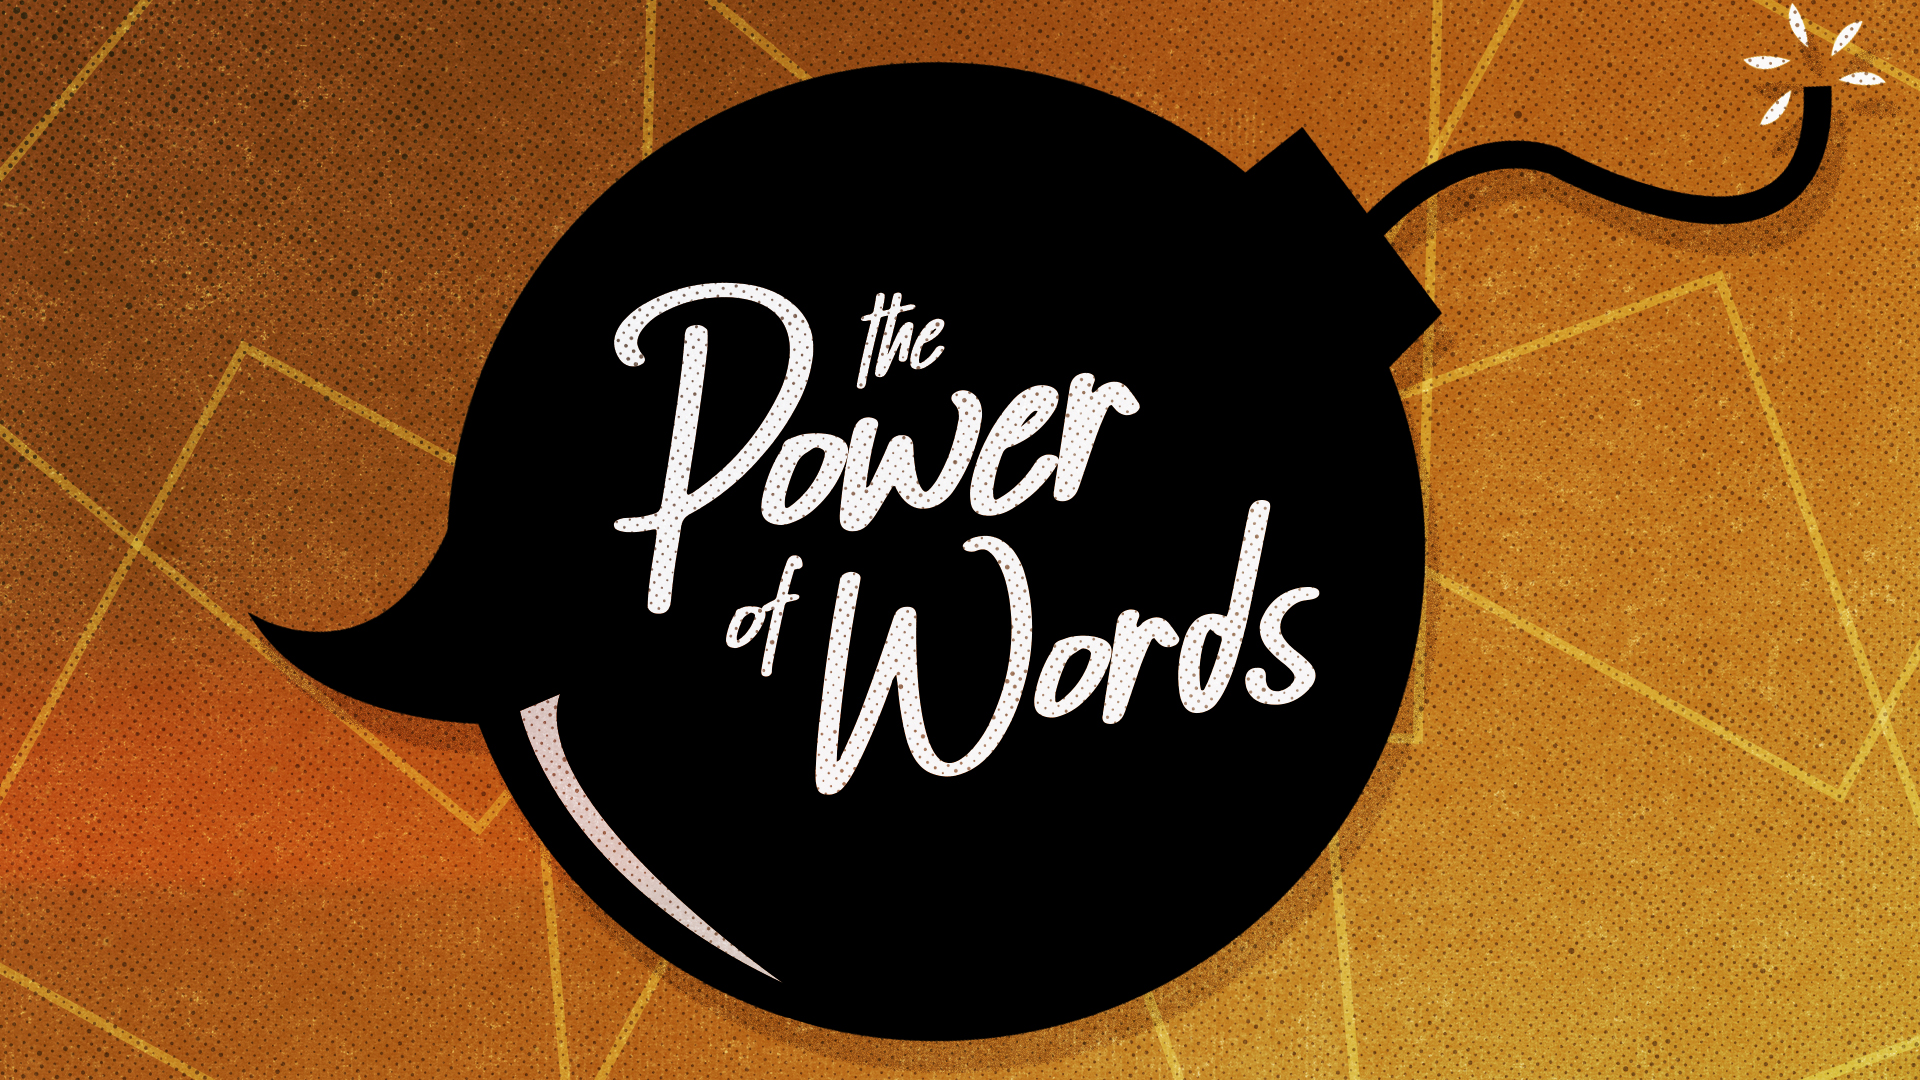 Power of Words graphic from https://www.pursuegod.org/the-power-of-our-words/